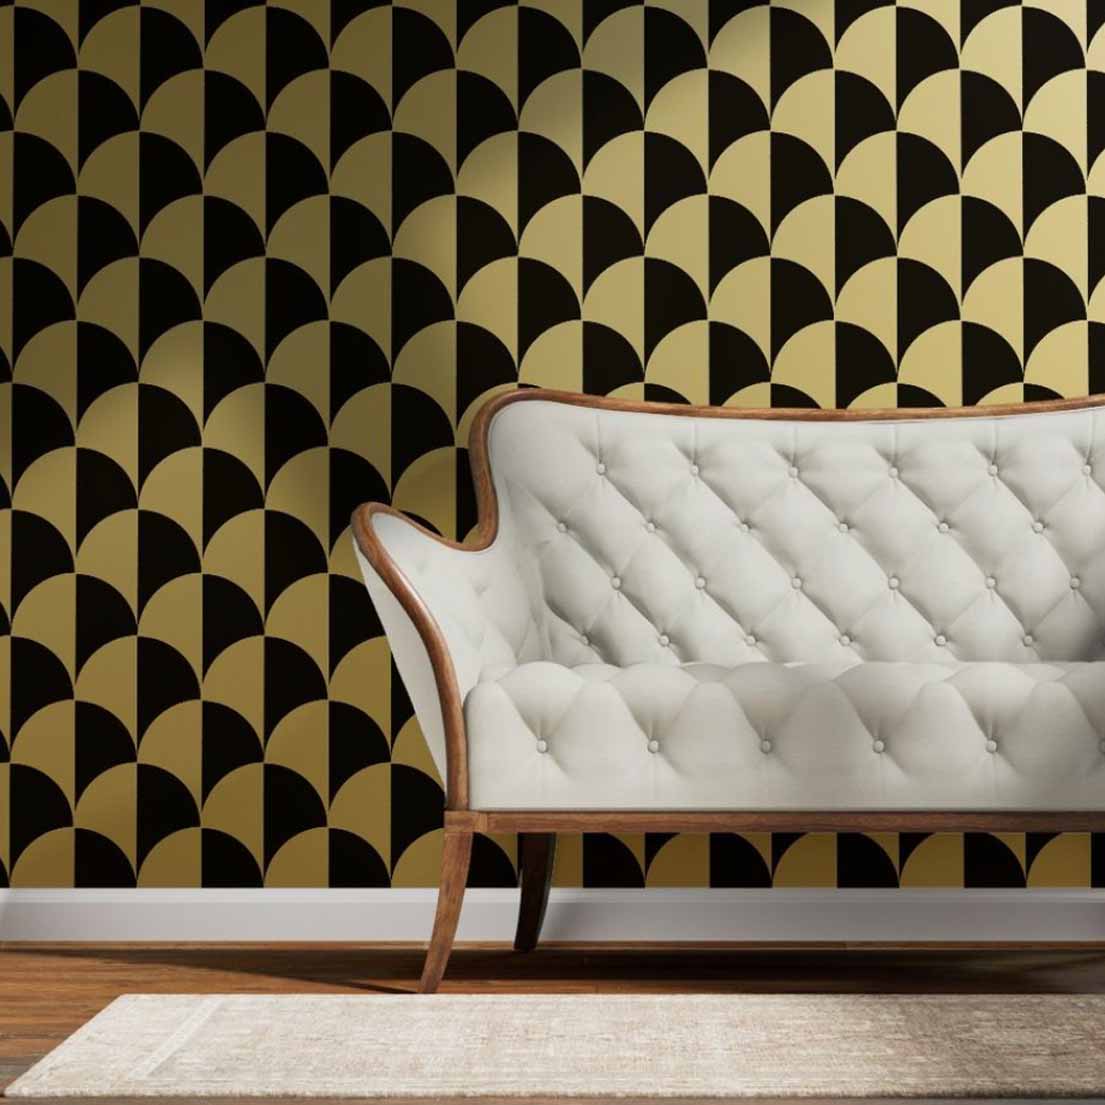 Round Checkers White on Charcoal Wallpaper in gold and black